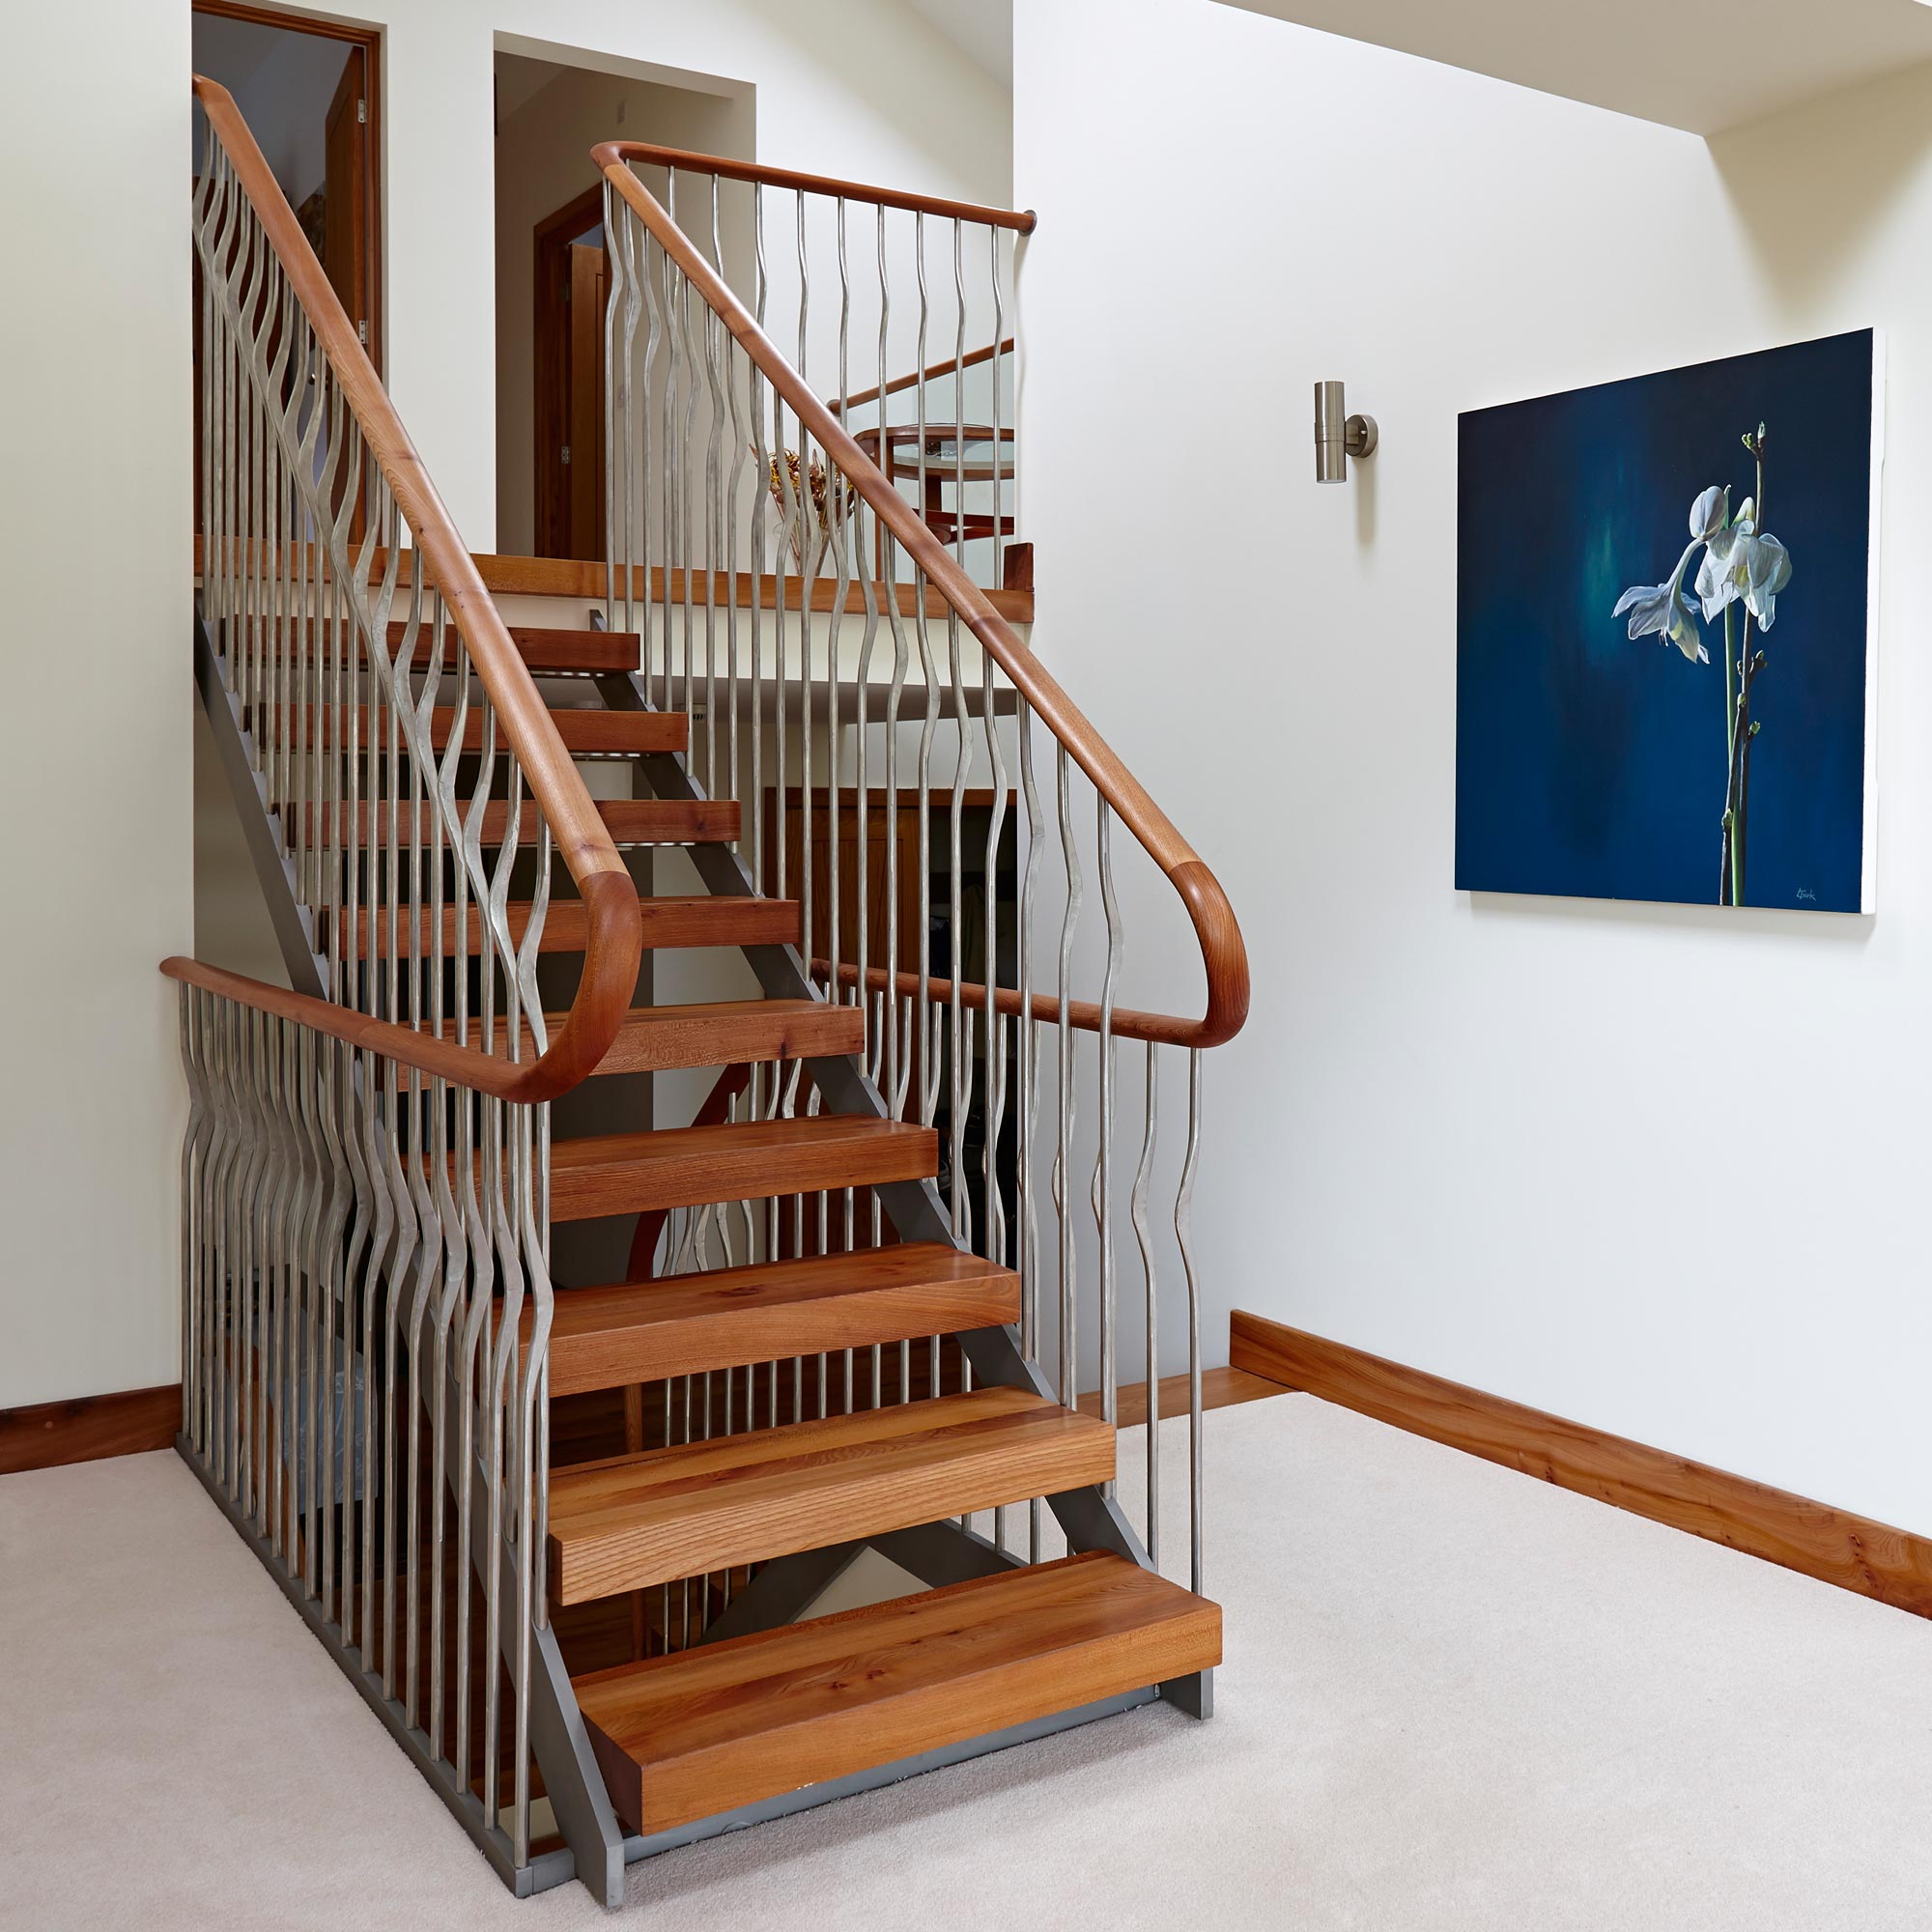 barn conversion staircase Barn stairs Bespoke Design Bisca